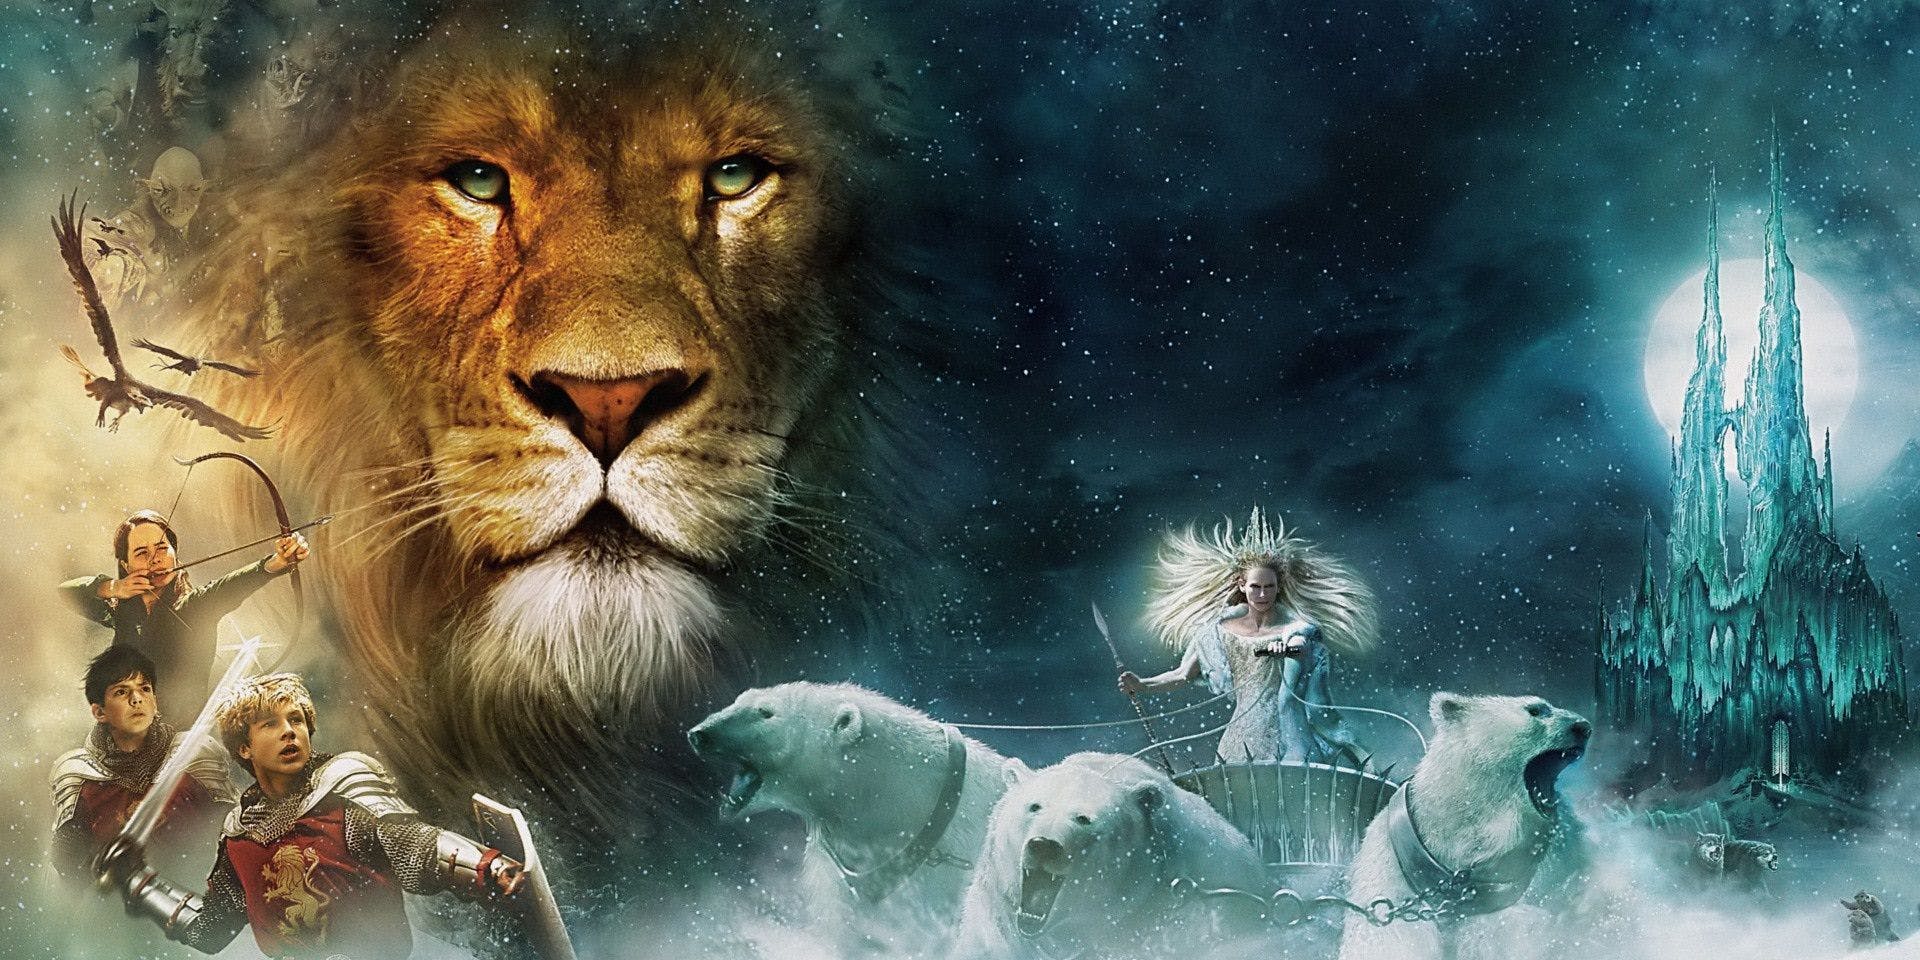 The Chronicles of Narnia (TBD)